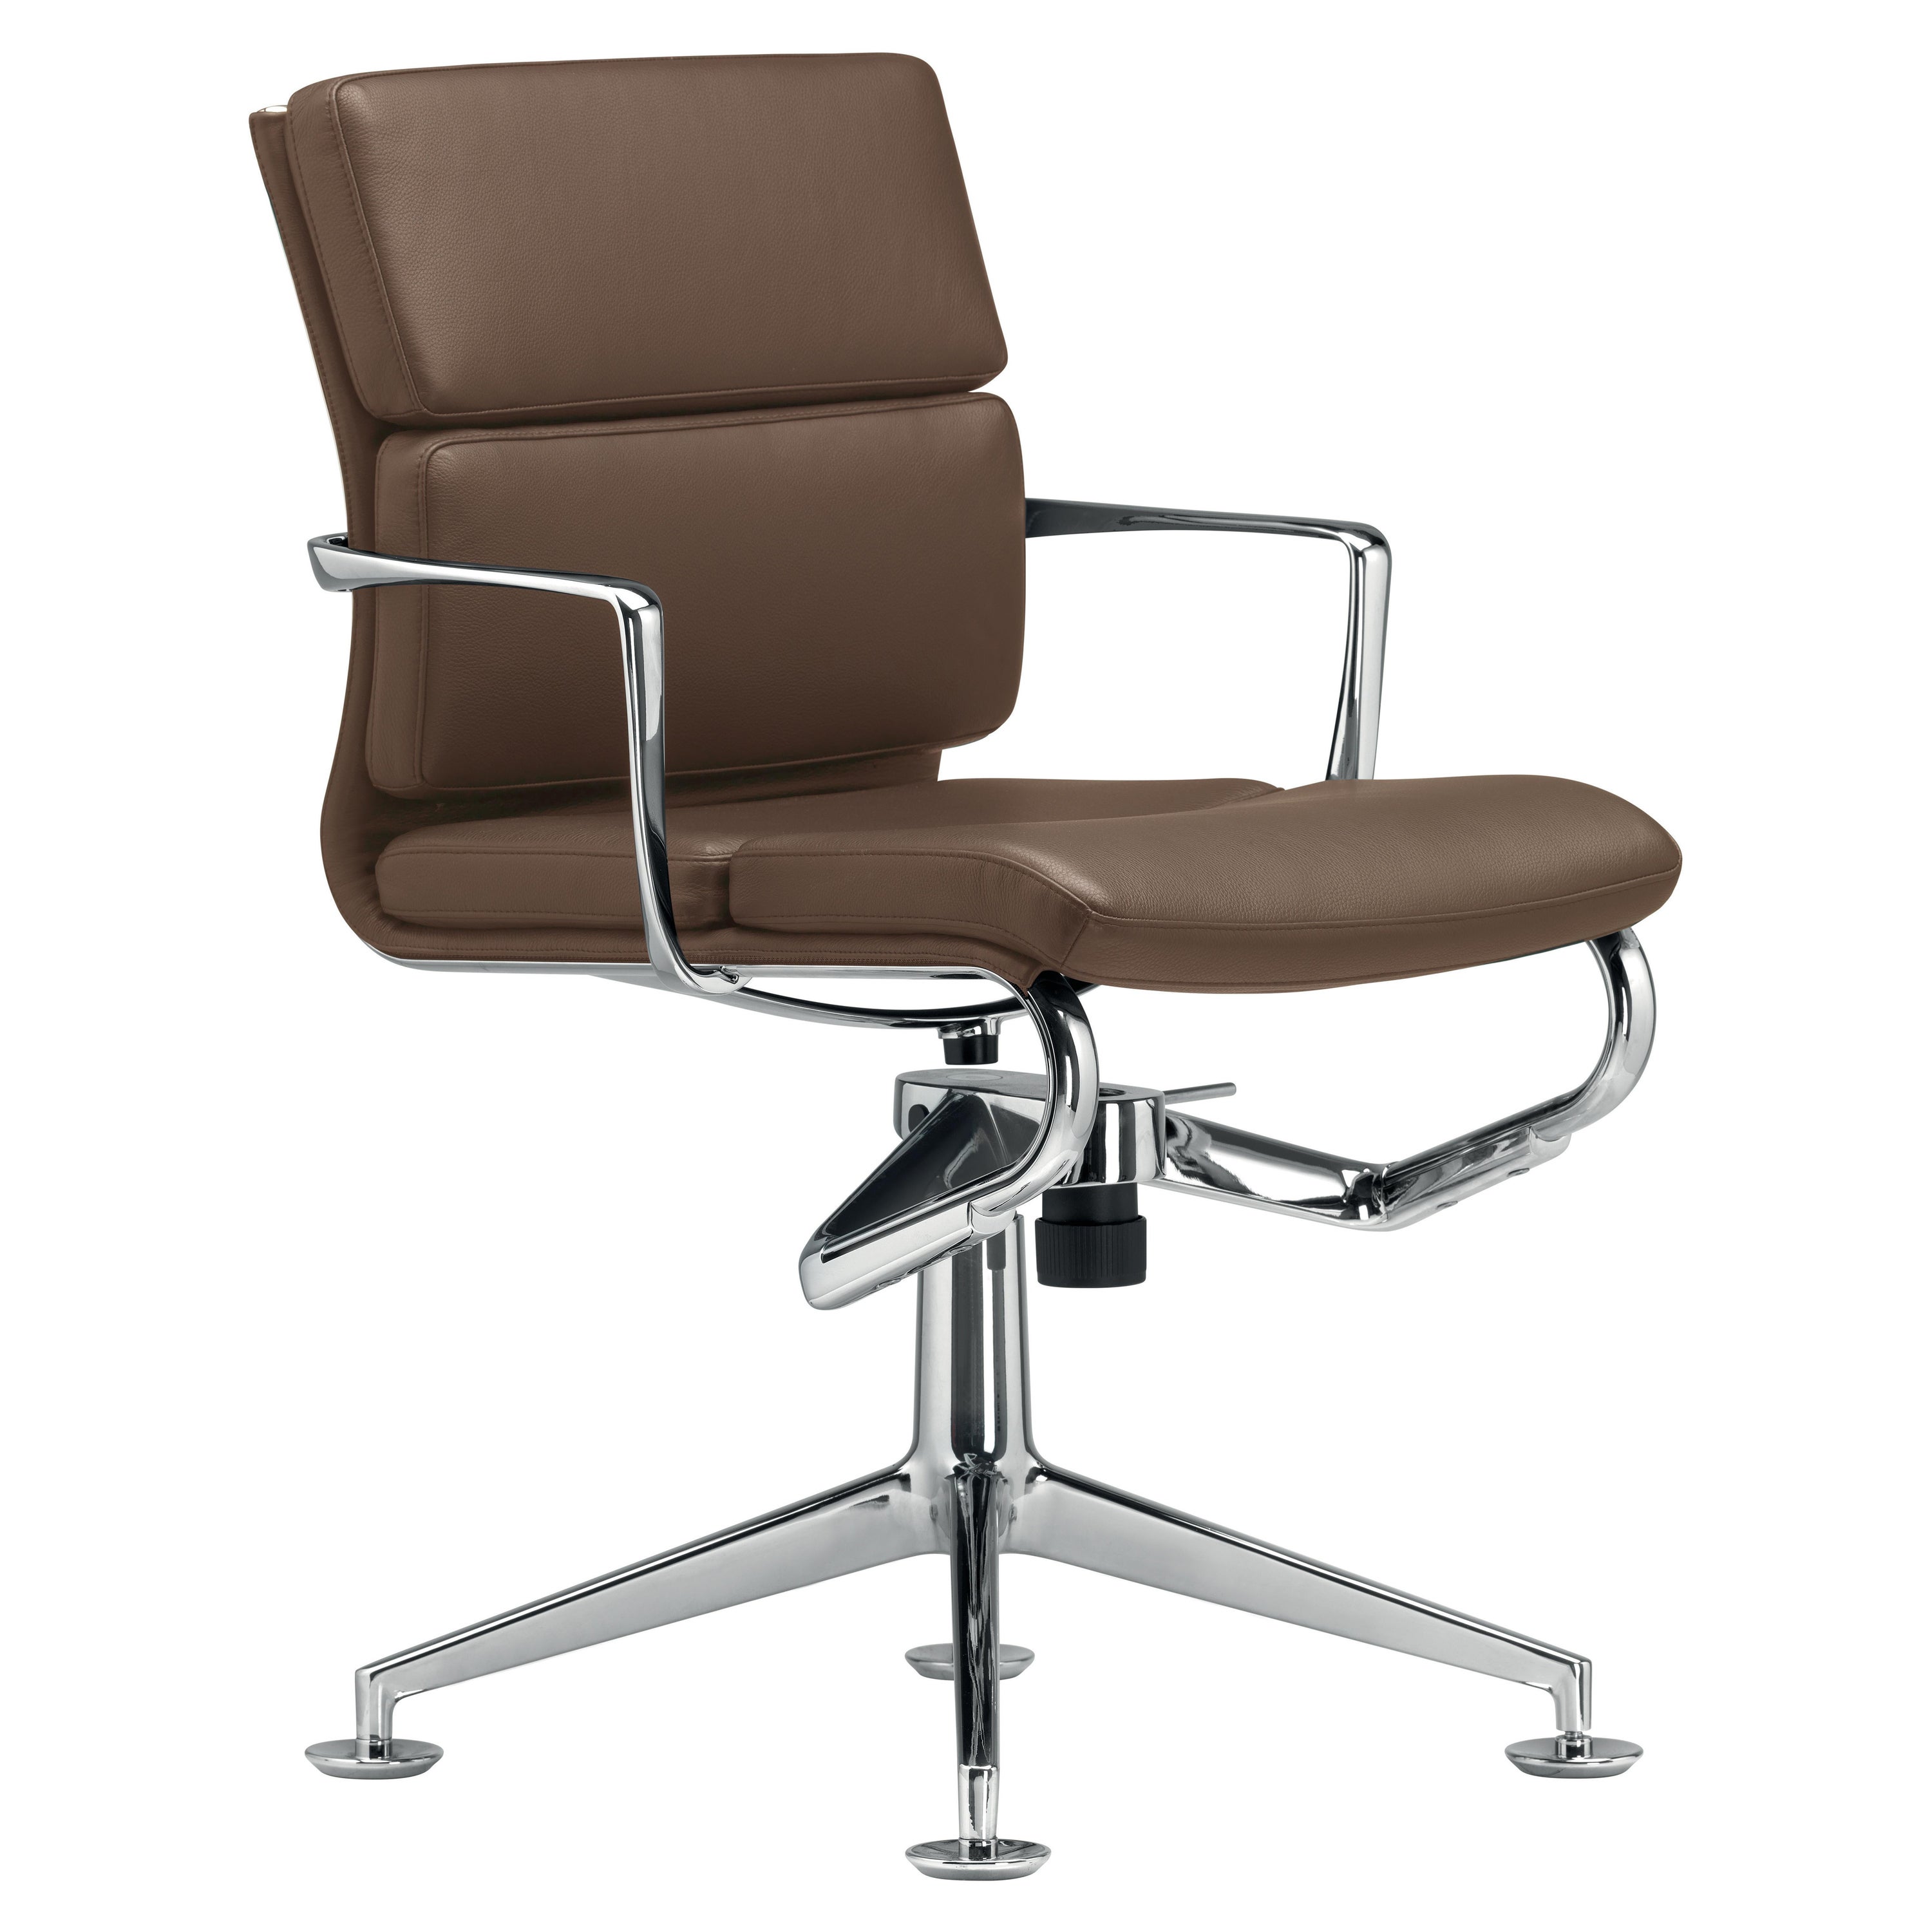 Alias 429 Meetingframe+ Tilt 47 Soft Chair in Brown Torba Seat and Chromed Frame For Sale